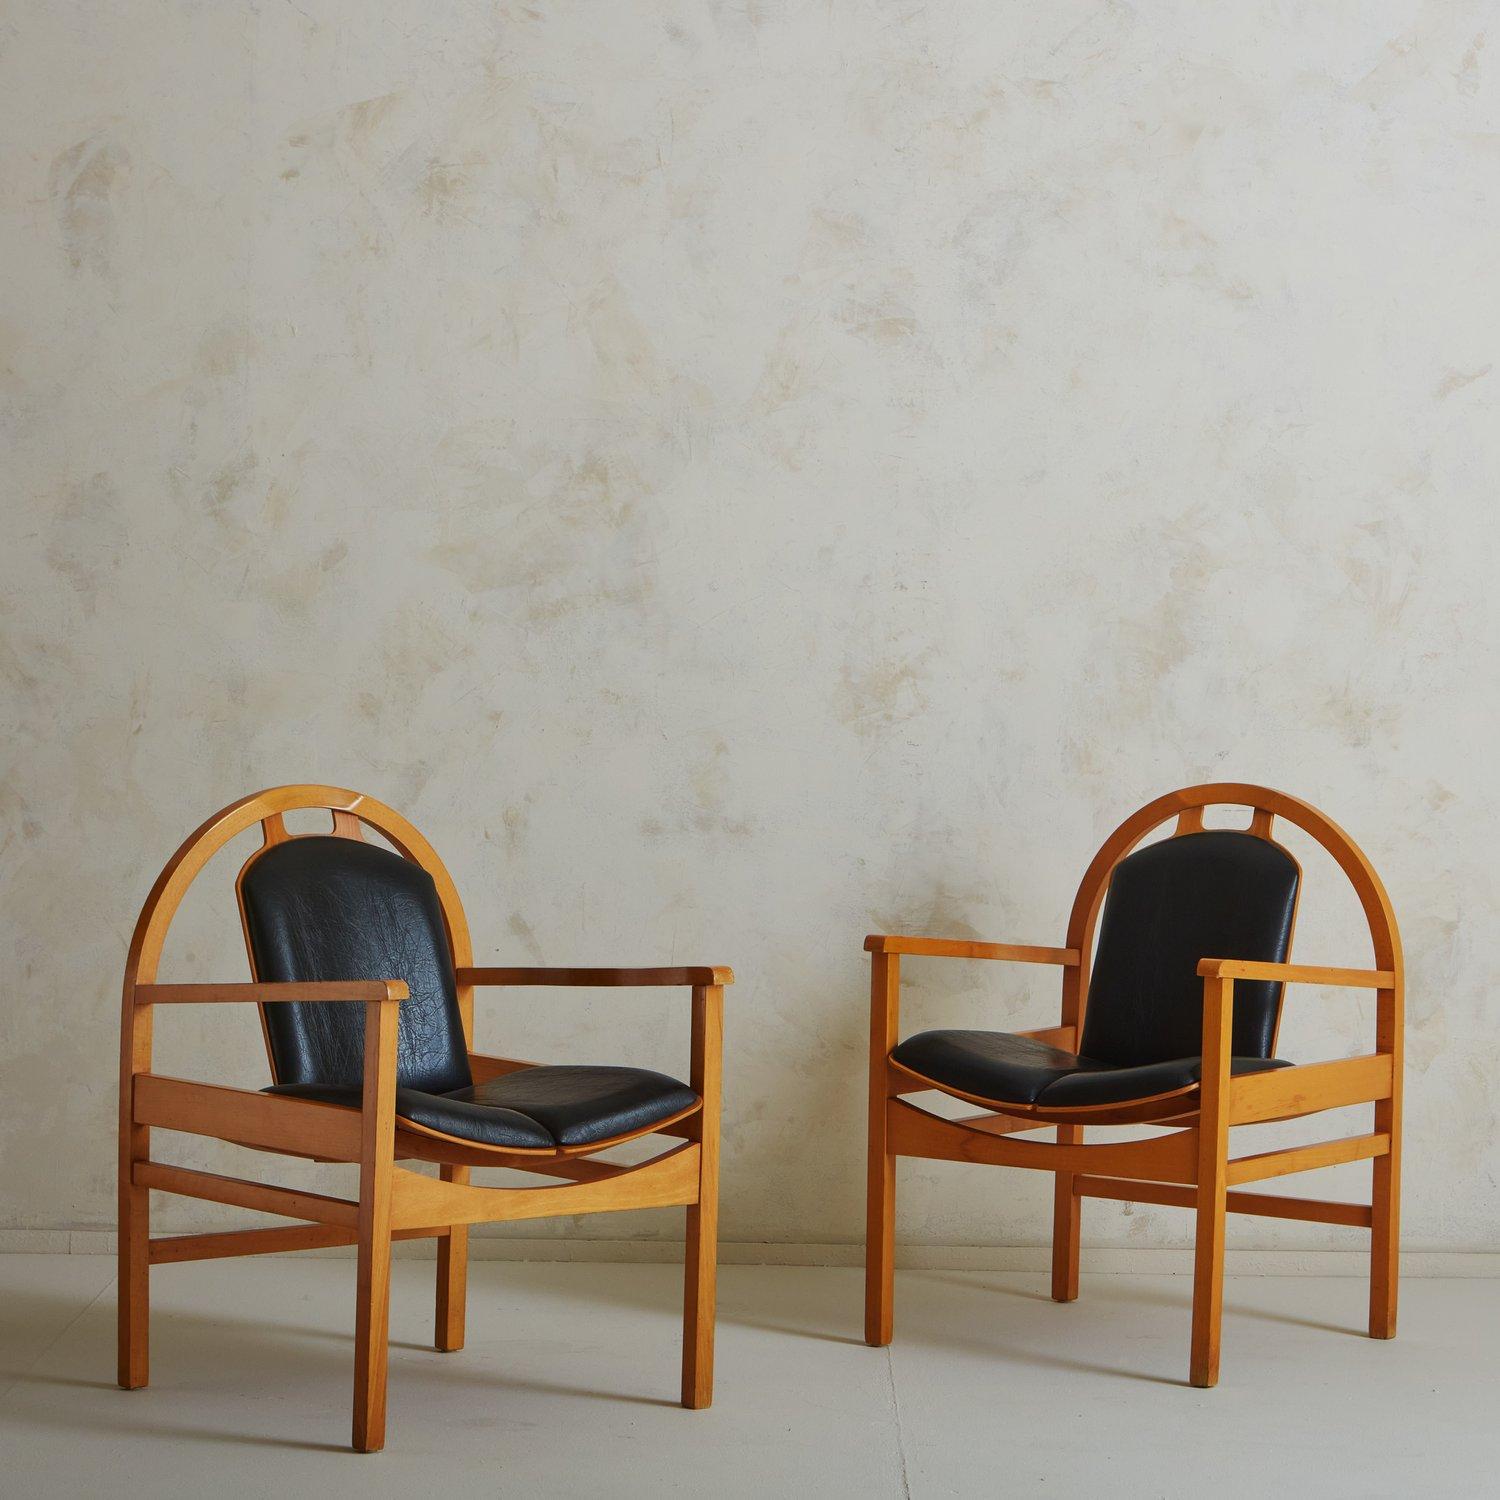 A pair of ‘Argos’ lounge chairs designed by French manufacturer Baumann in the 1970s. These chairs feature sculptural stained beechwood frames with patinated black leather seats and backs. They have rounded, angled seat backs with vertical cutout